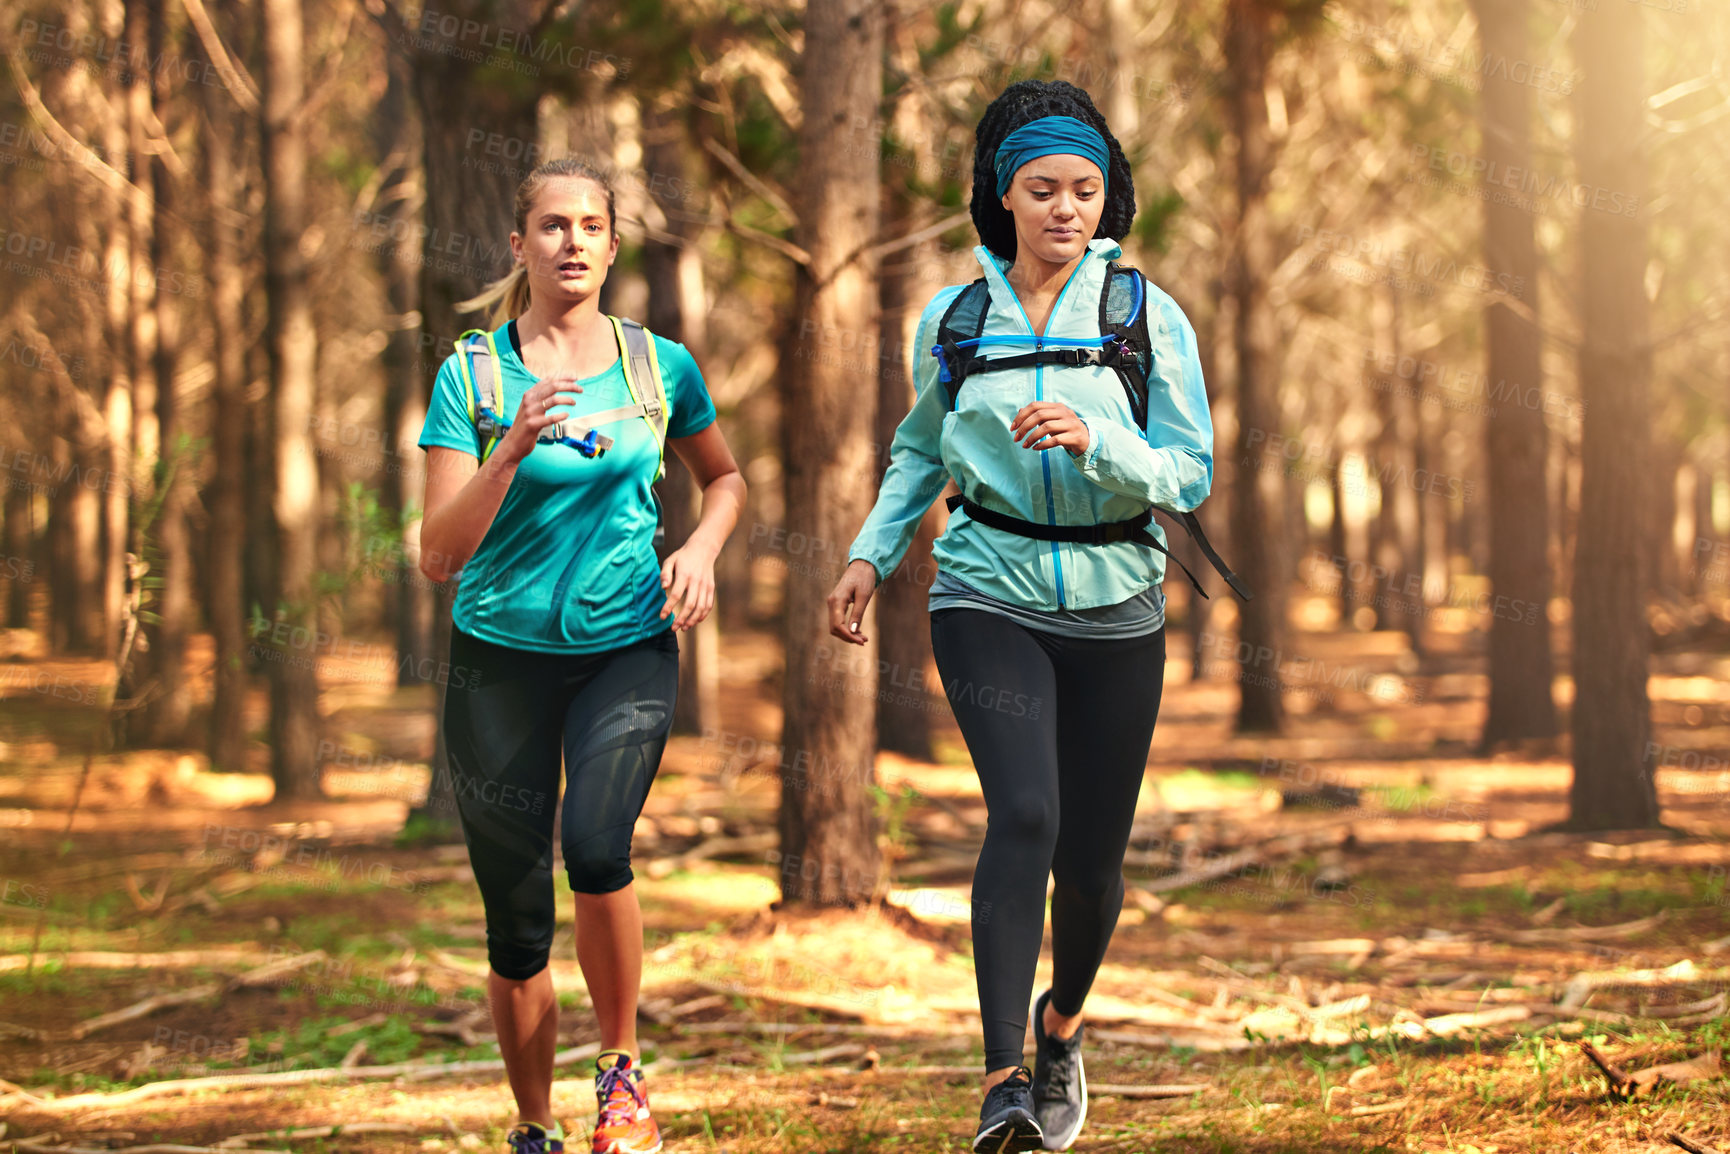 Buy stock photo Shot of two sporty young women out exercising in nature